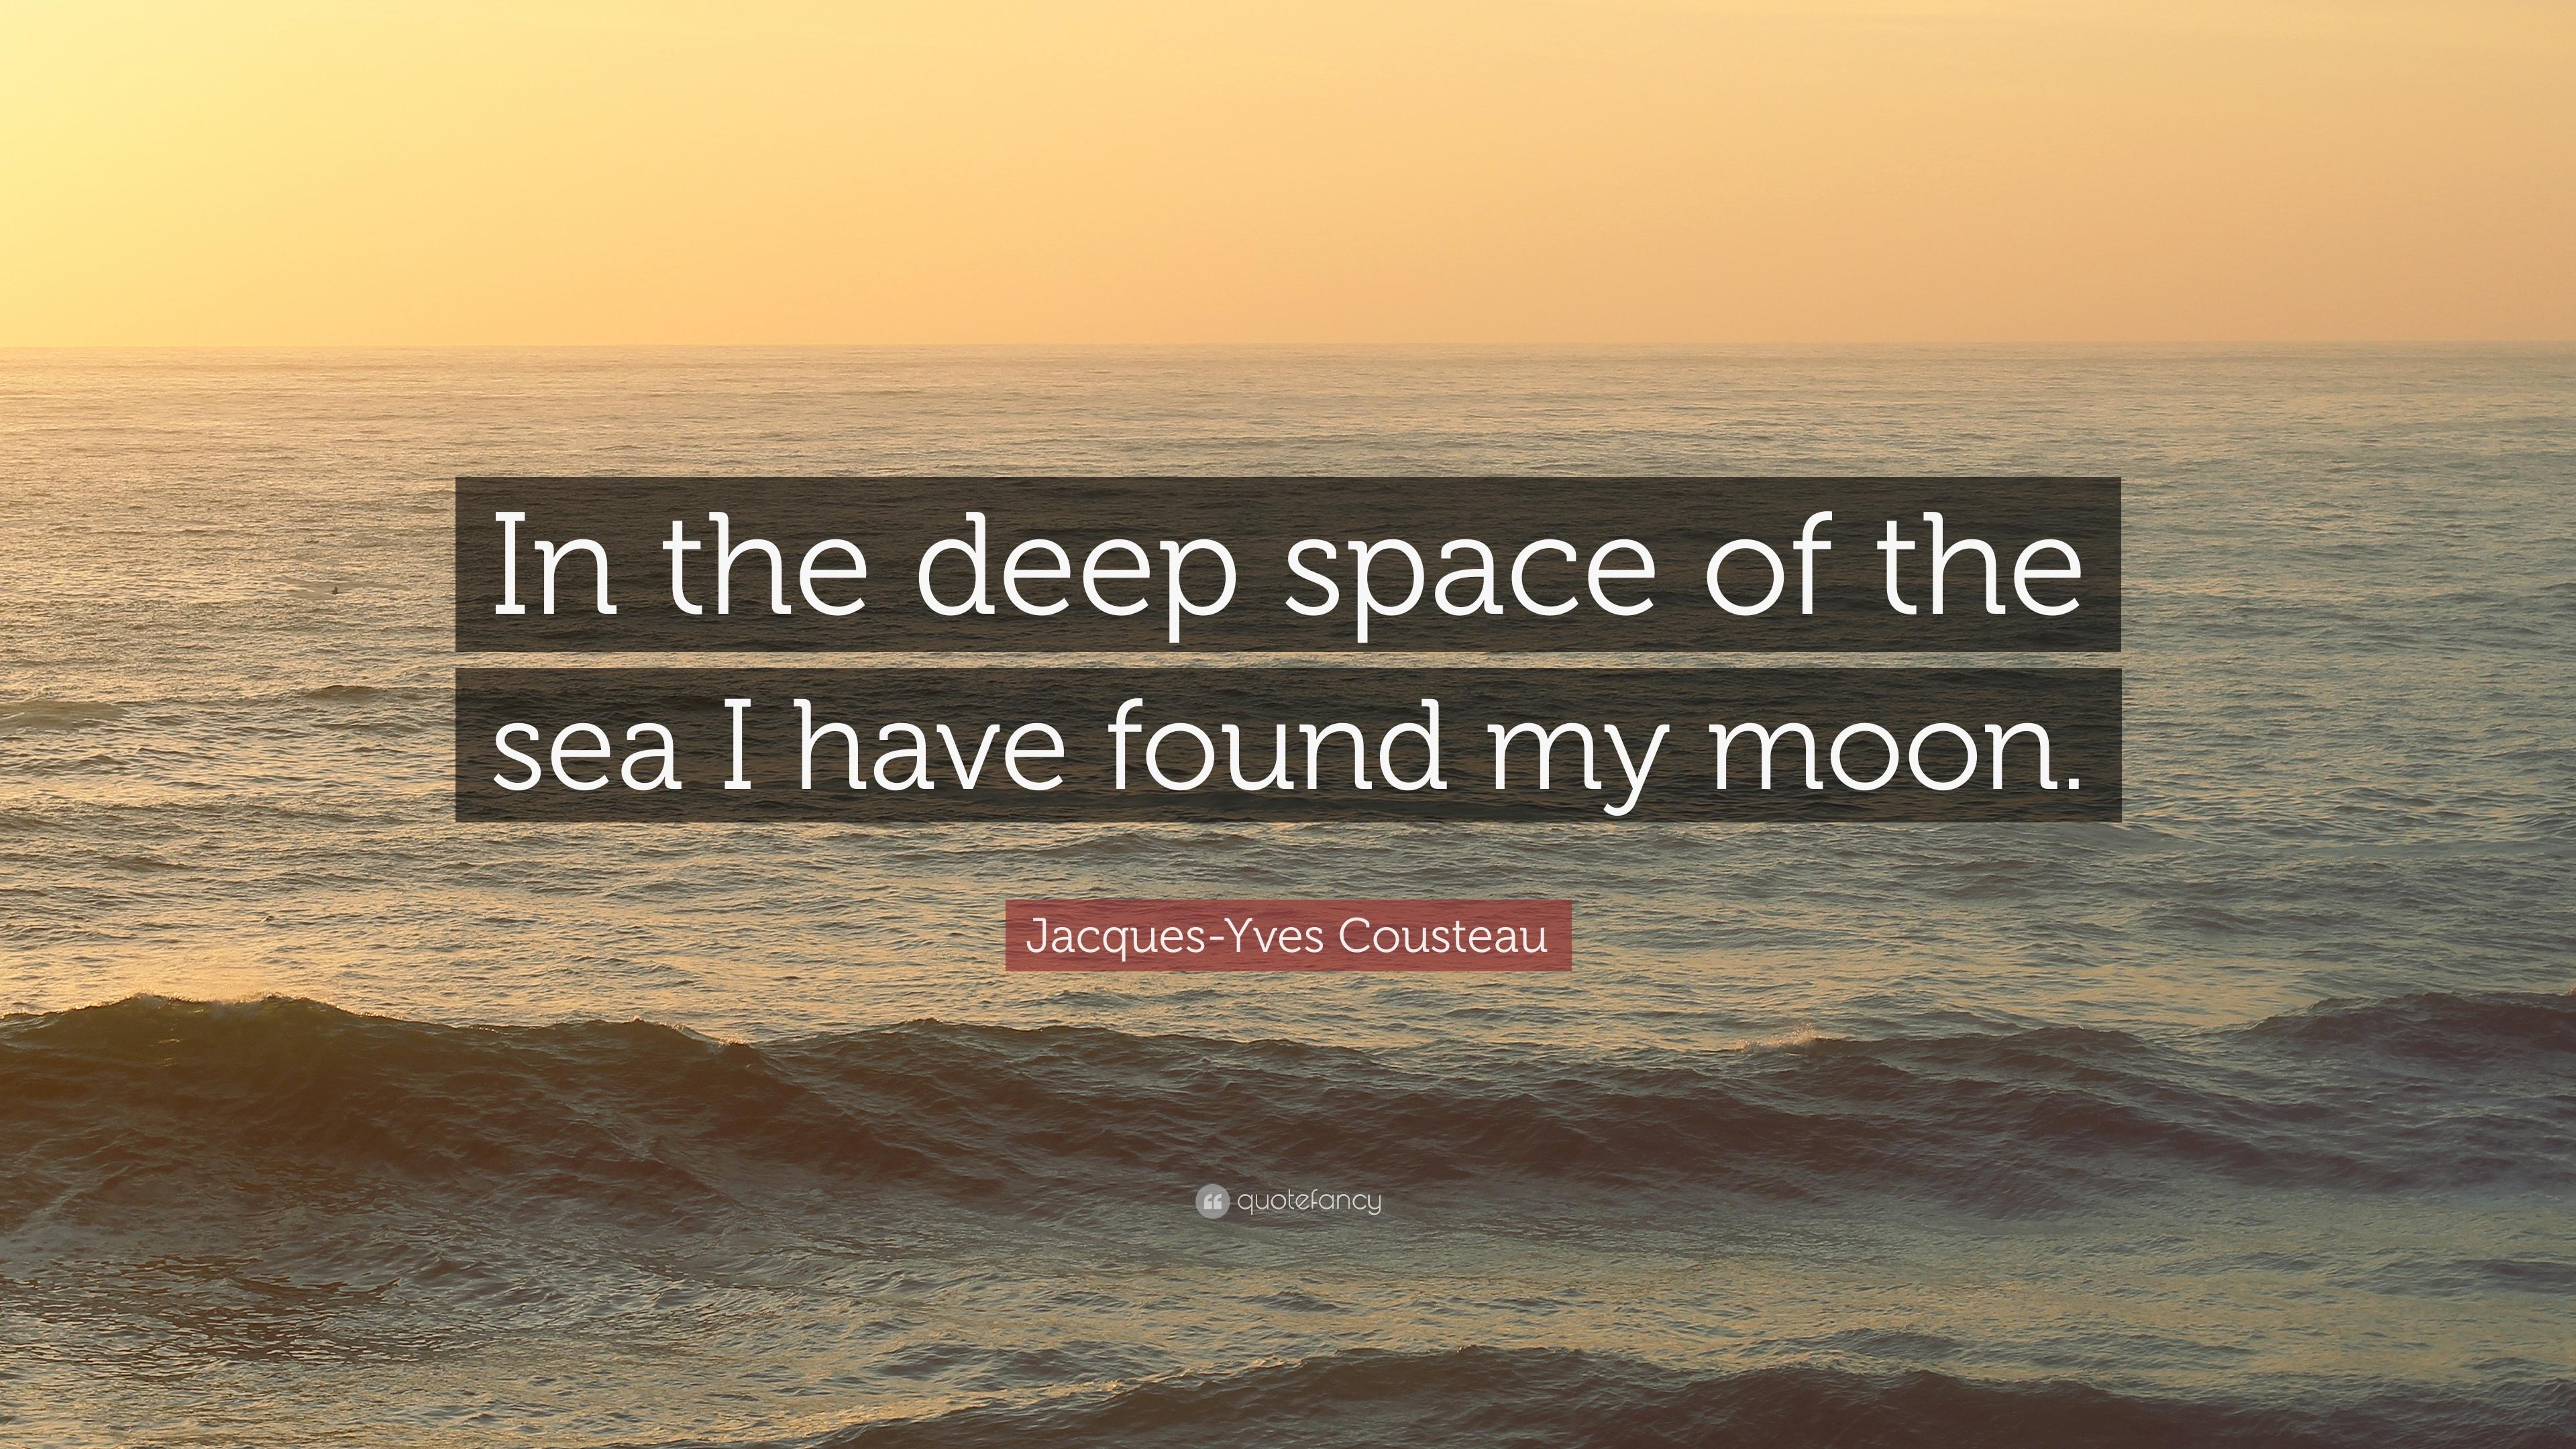 Jacques Yves Cousteau Quote: “In The Deep Space Of The Sea I Have